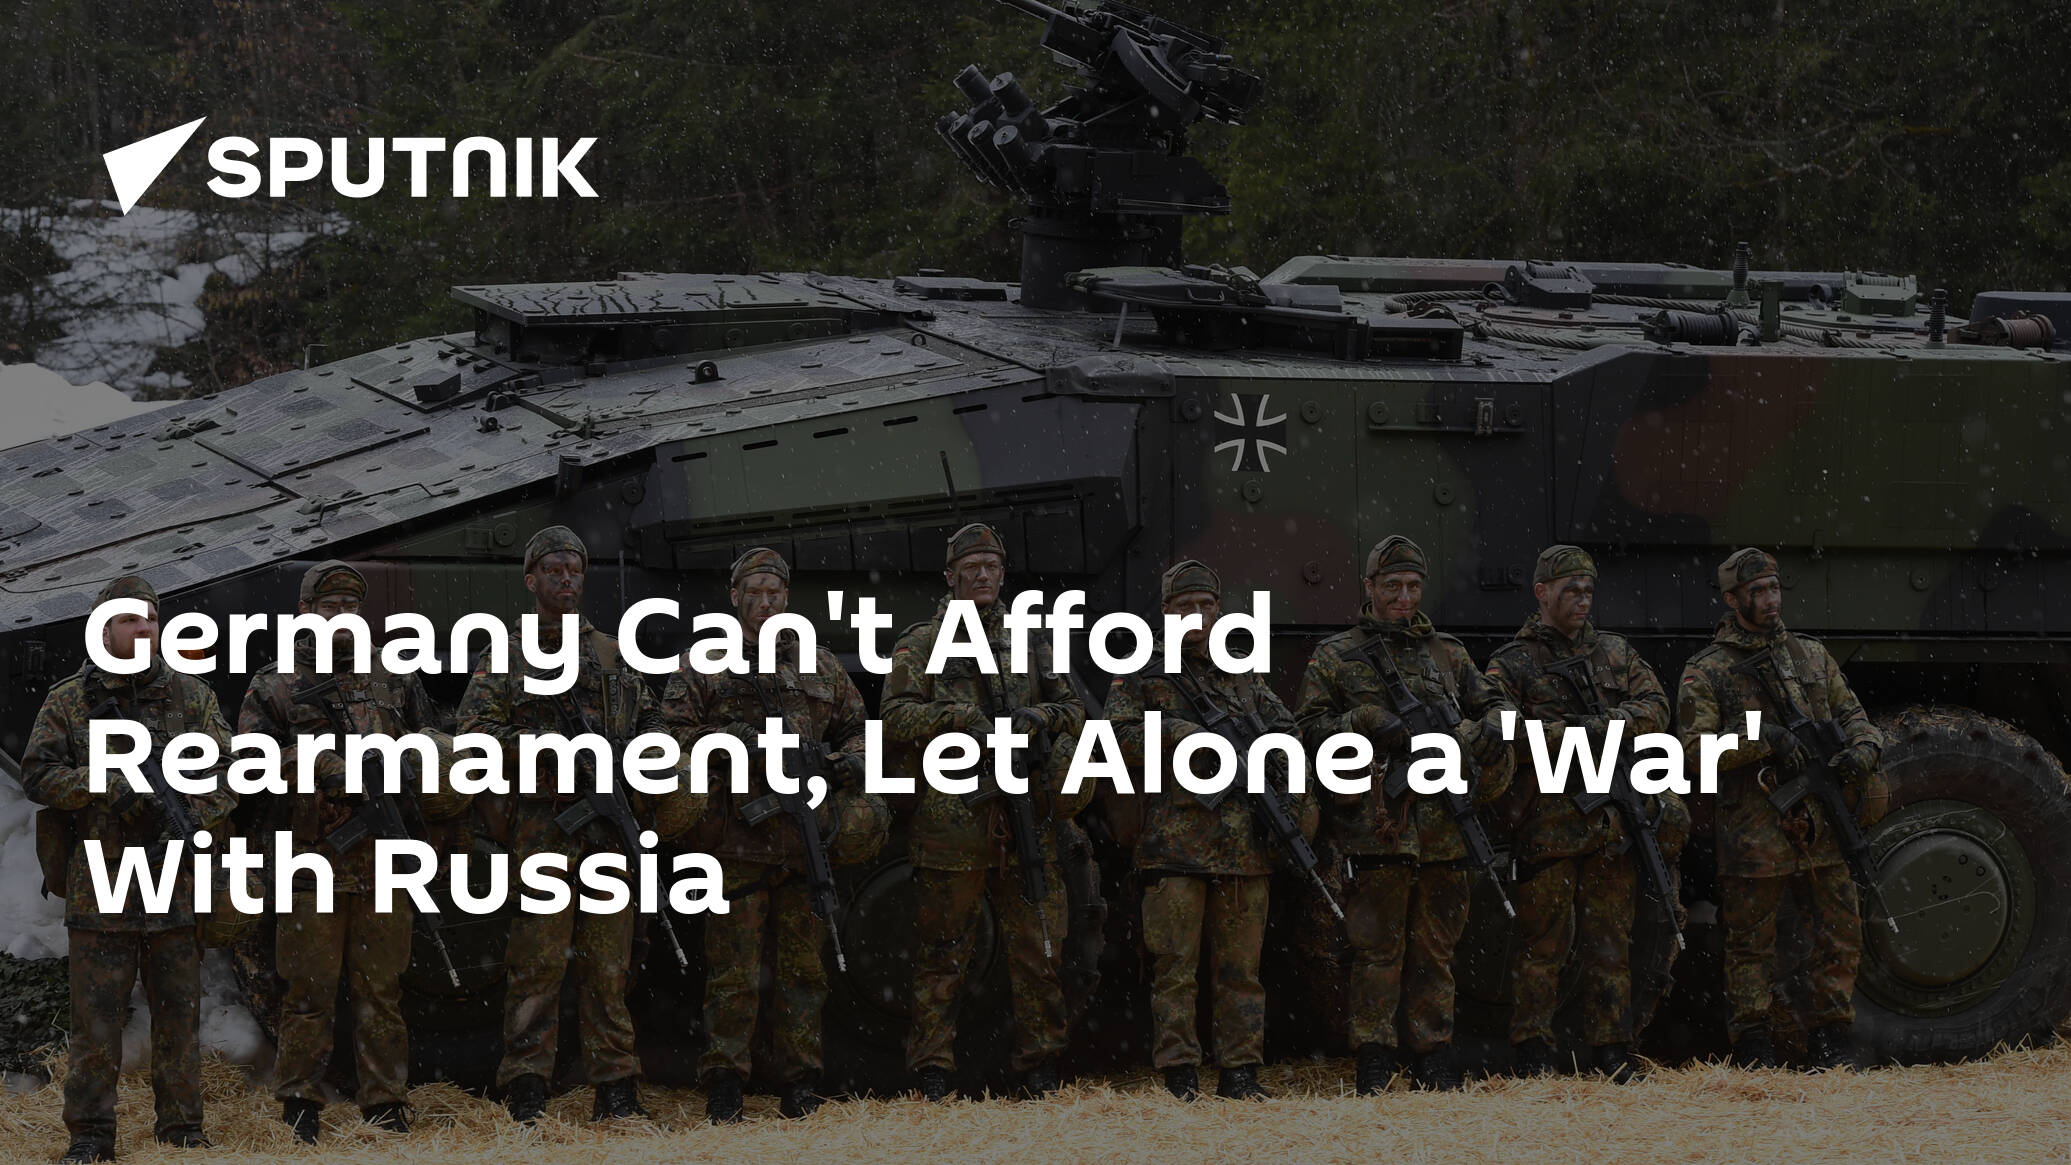 Germany Can't Afford Rearmament, Let Alone a 'War' With Russia 23.01.